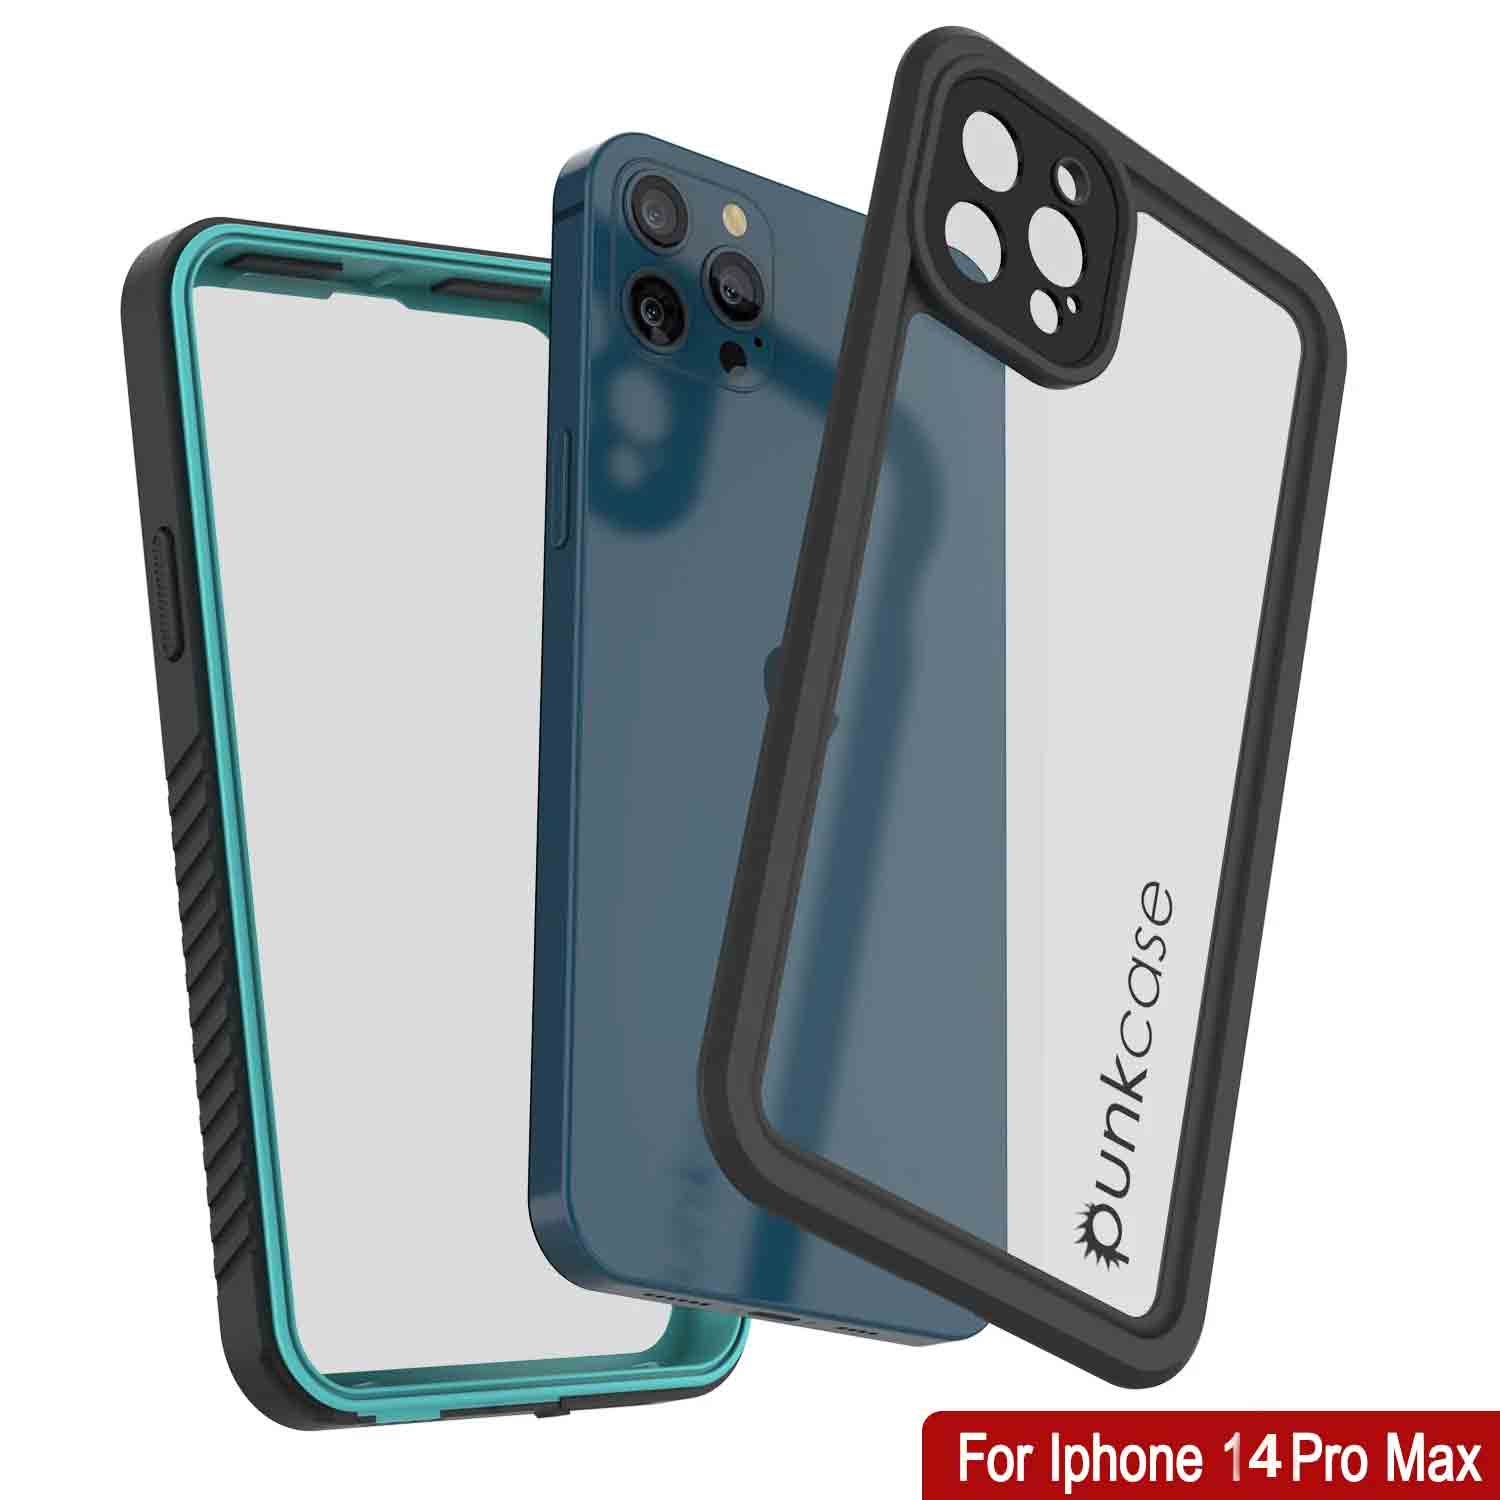 iPhone 14 Pro Max Waterproof Case, Punkcase [Extreme Series] Armor Cover W/ Built In Screen Protector [Teal]